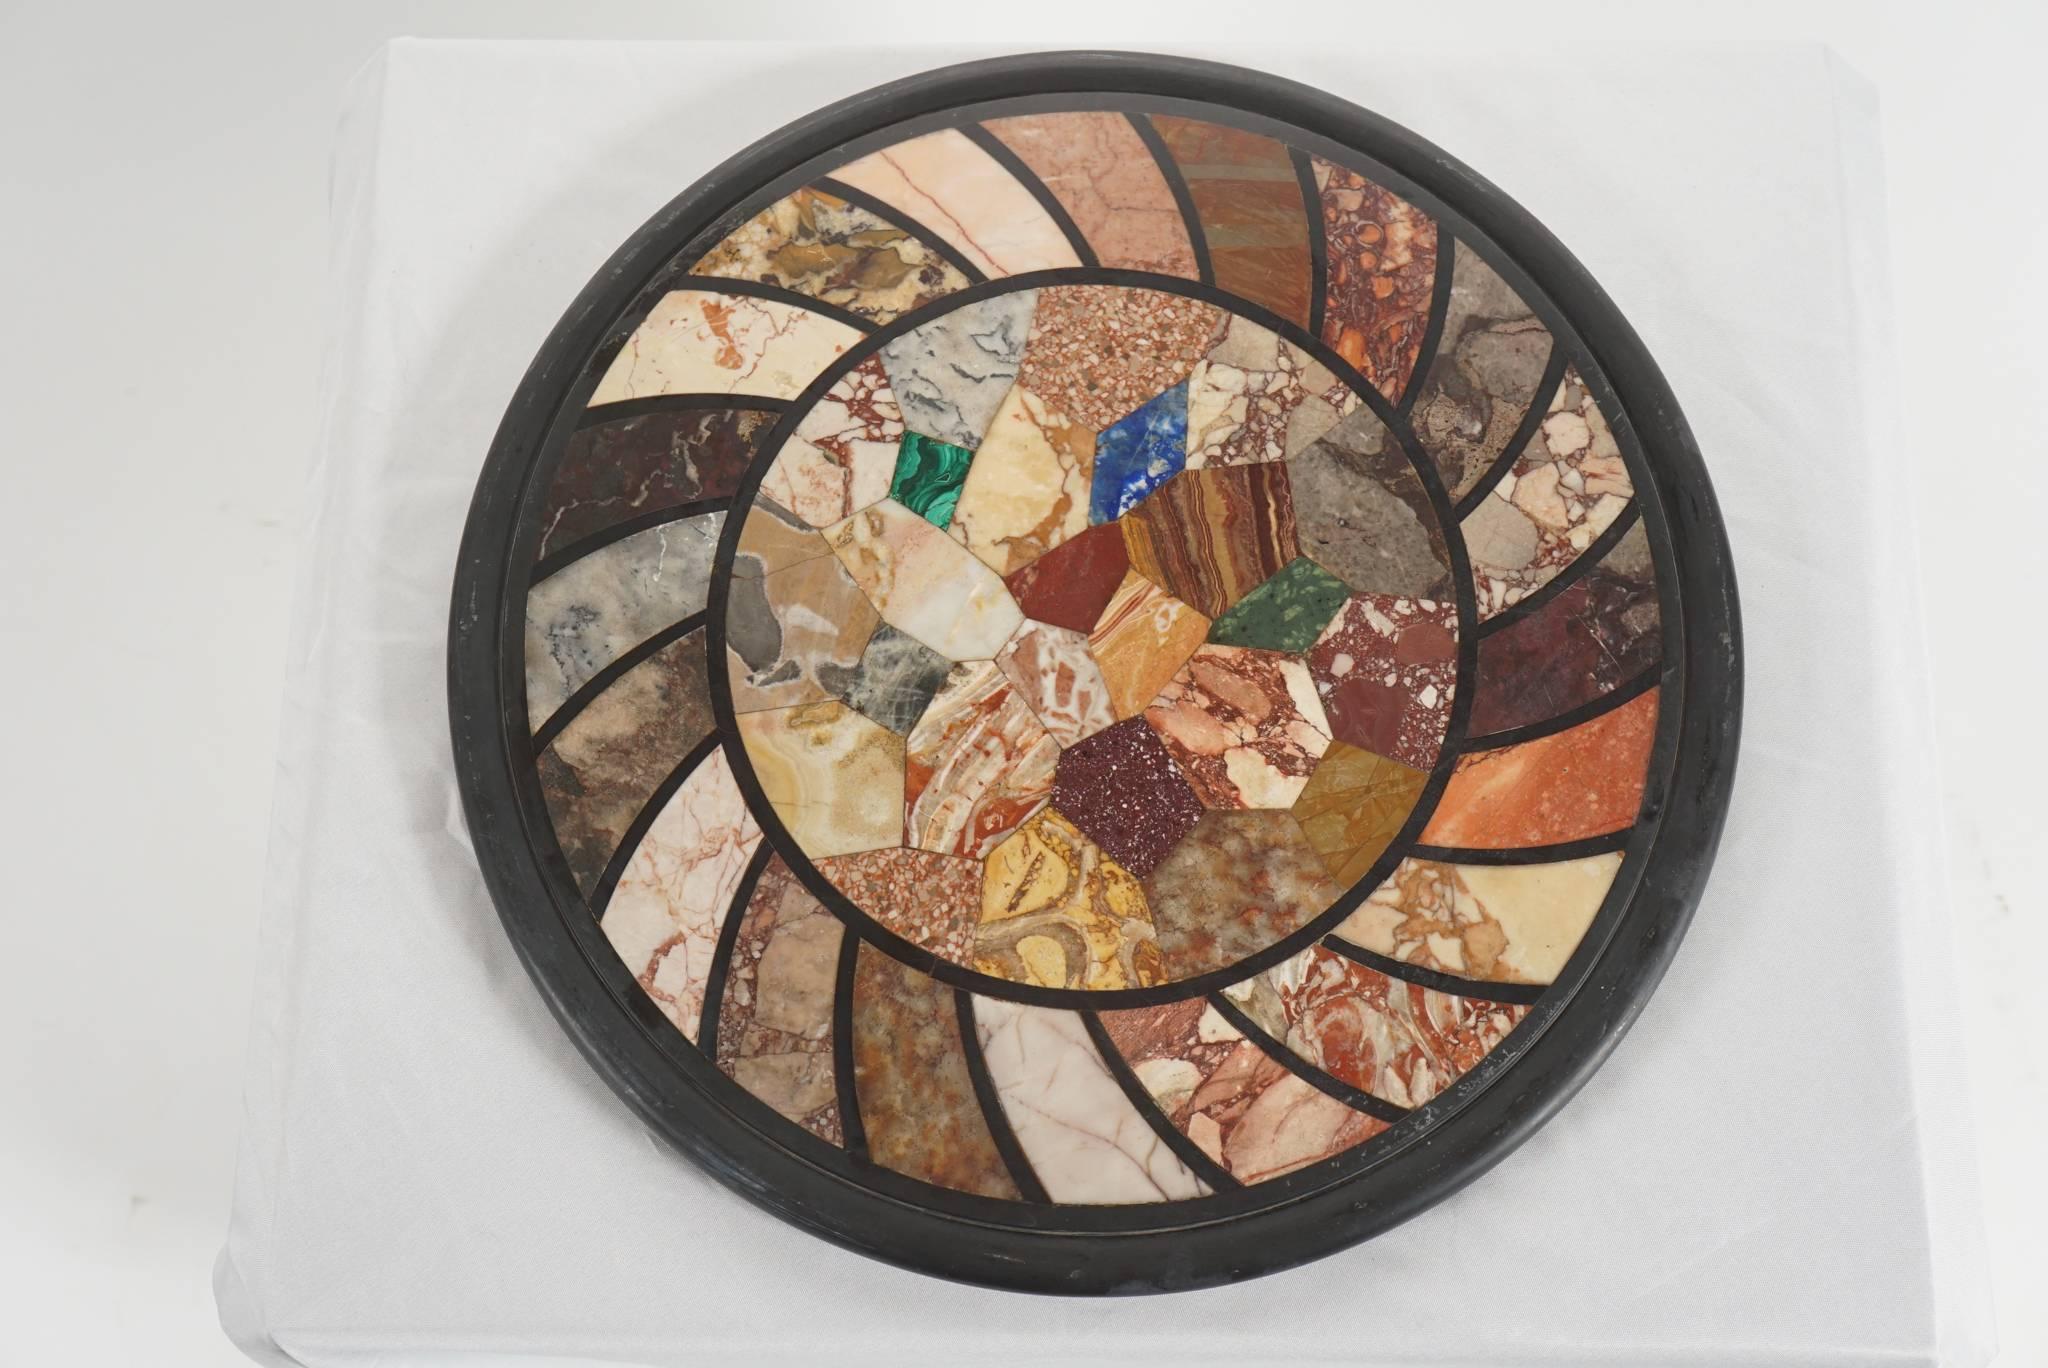 Third-quarter 19th century Italian 'Grand Tour' specimen marbles plaque of roundel form having over 30 different rare and ancient marbles, including malachite, porphyry, jasper, and giallo antico. Originally meant for use as a tabletop and never